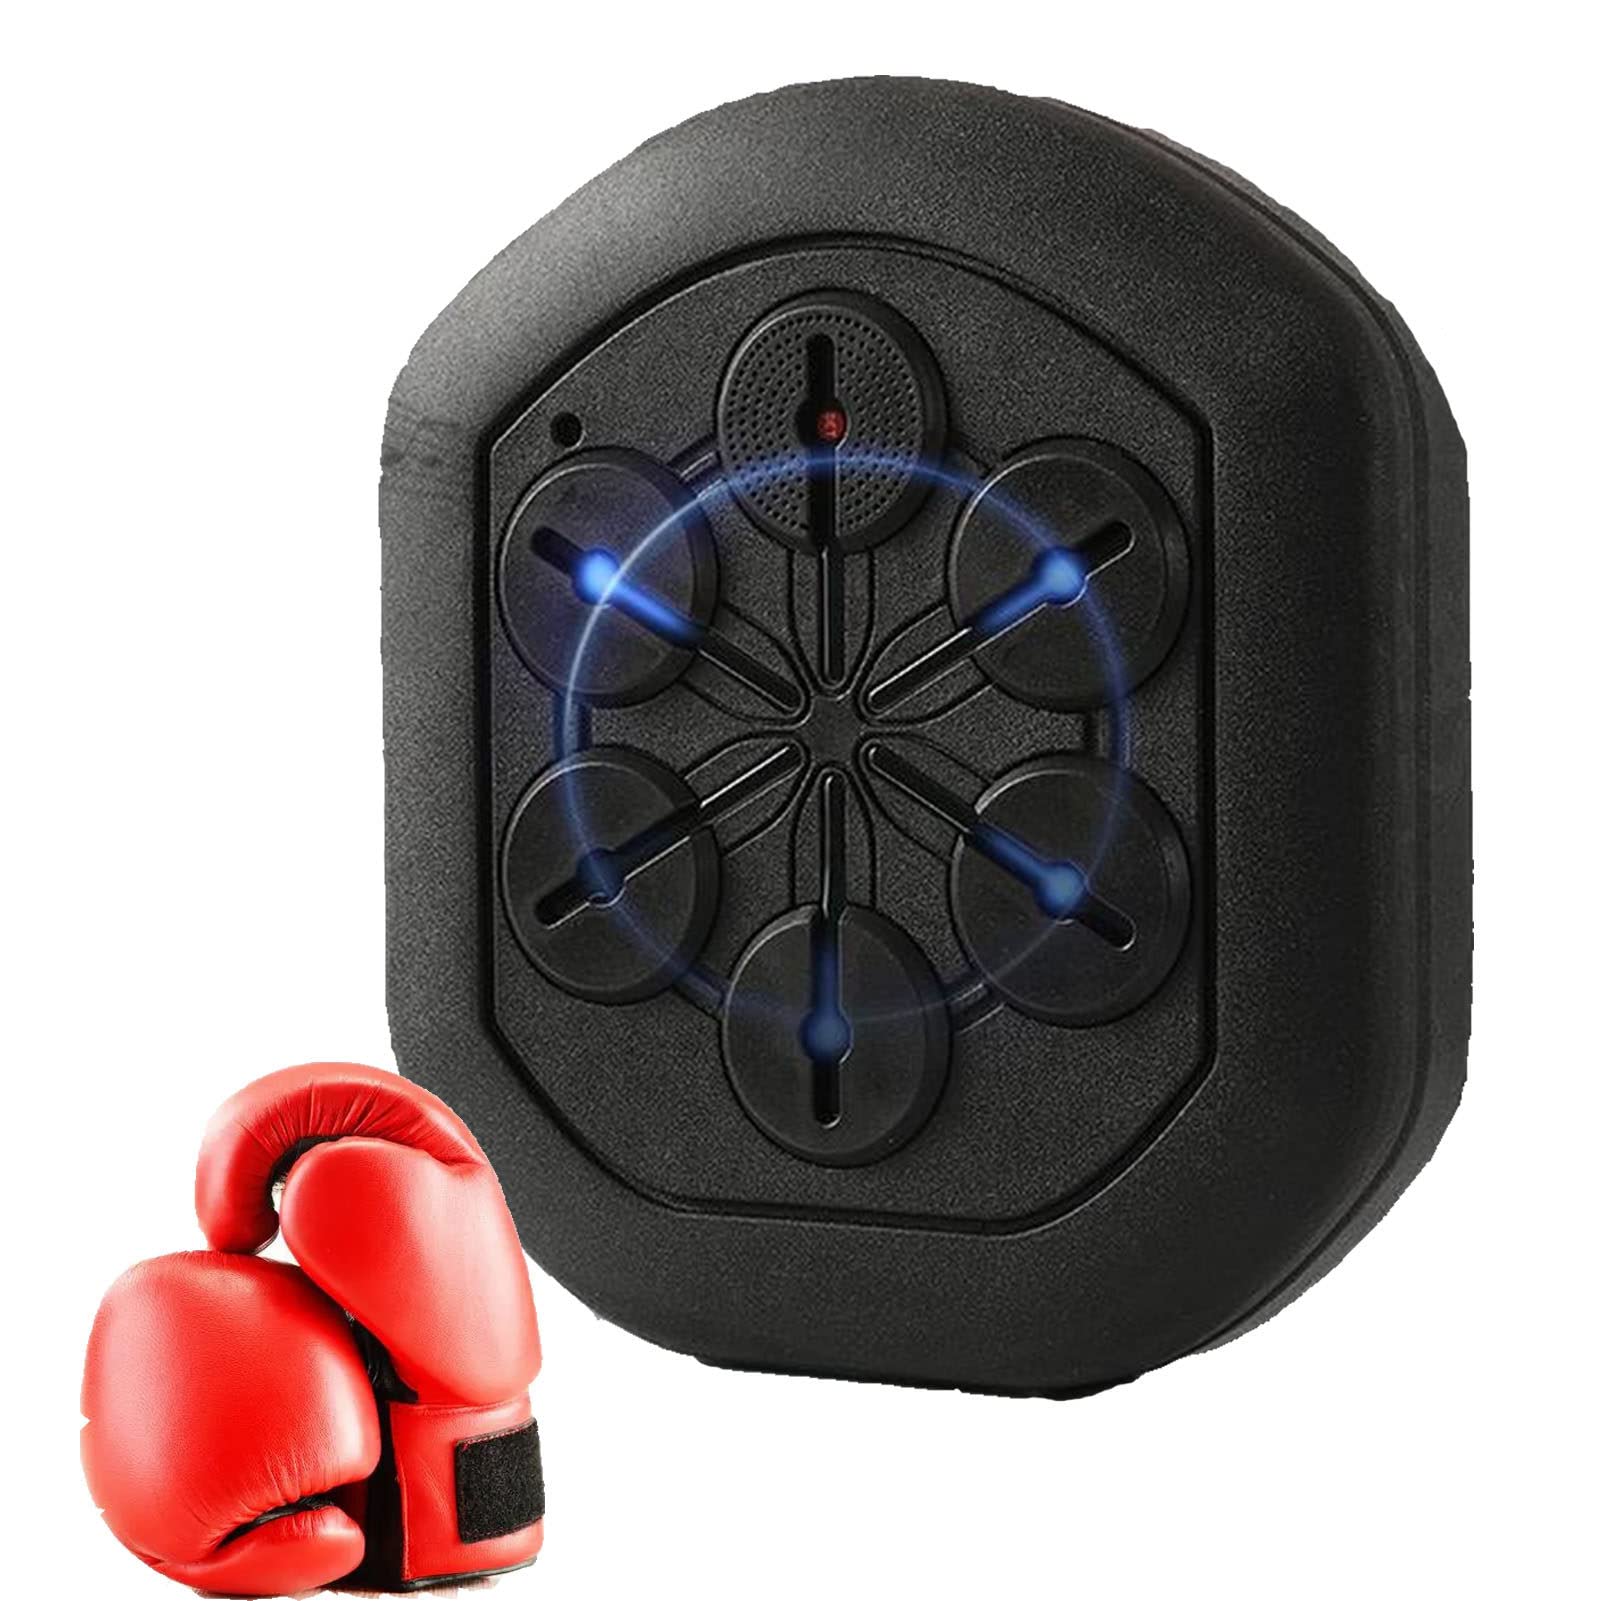 AA-SS Smart Music Boxing Machine with Boxing Gloves, Multi Musical Target  Boxing Reaction Wall Targets,hit The Target According to The Music and  Lighting